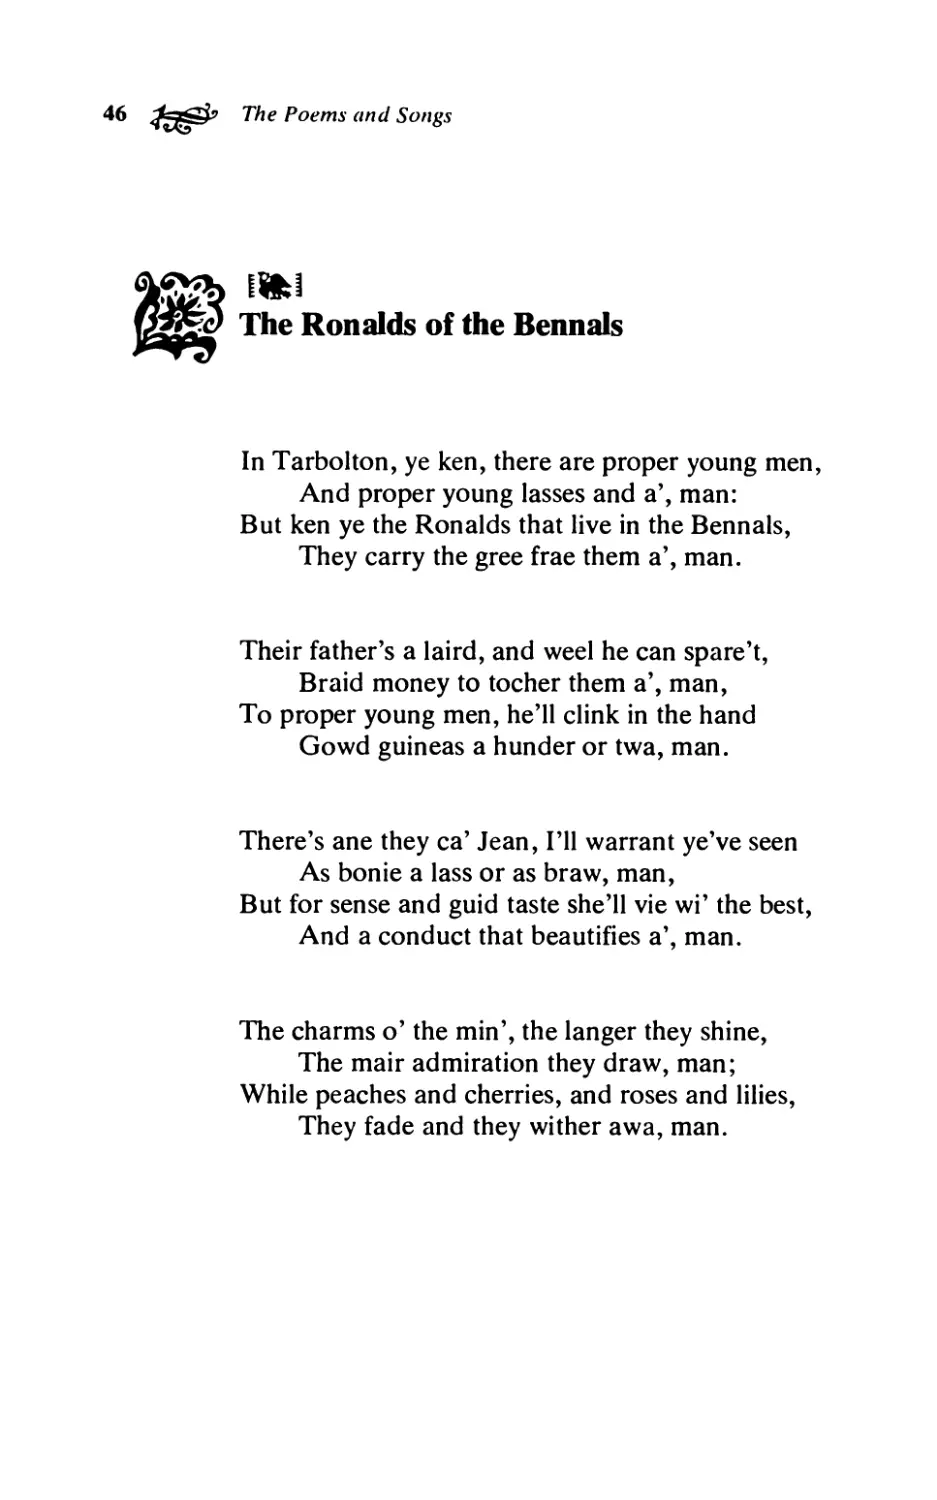 The Ronalds of the Bennals